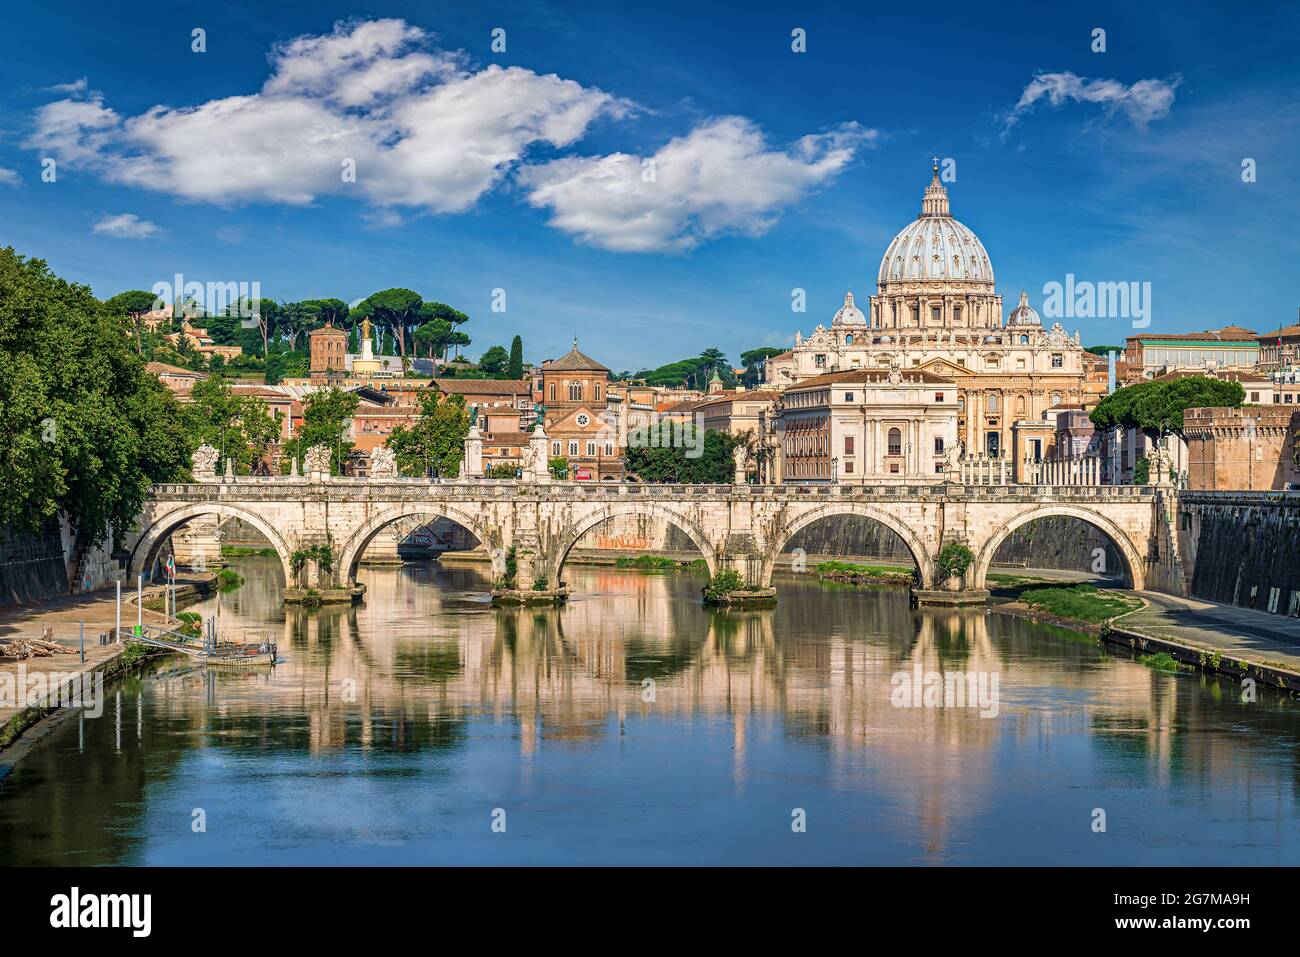 Basilica St Peter and the Tiber river in Rome, Italy Stock Photo